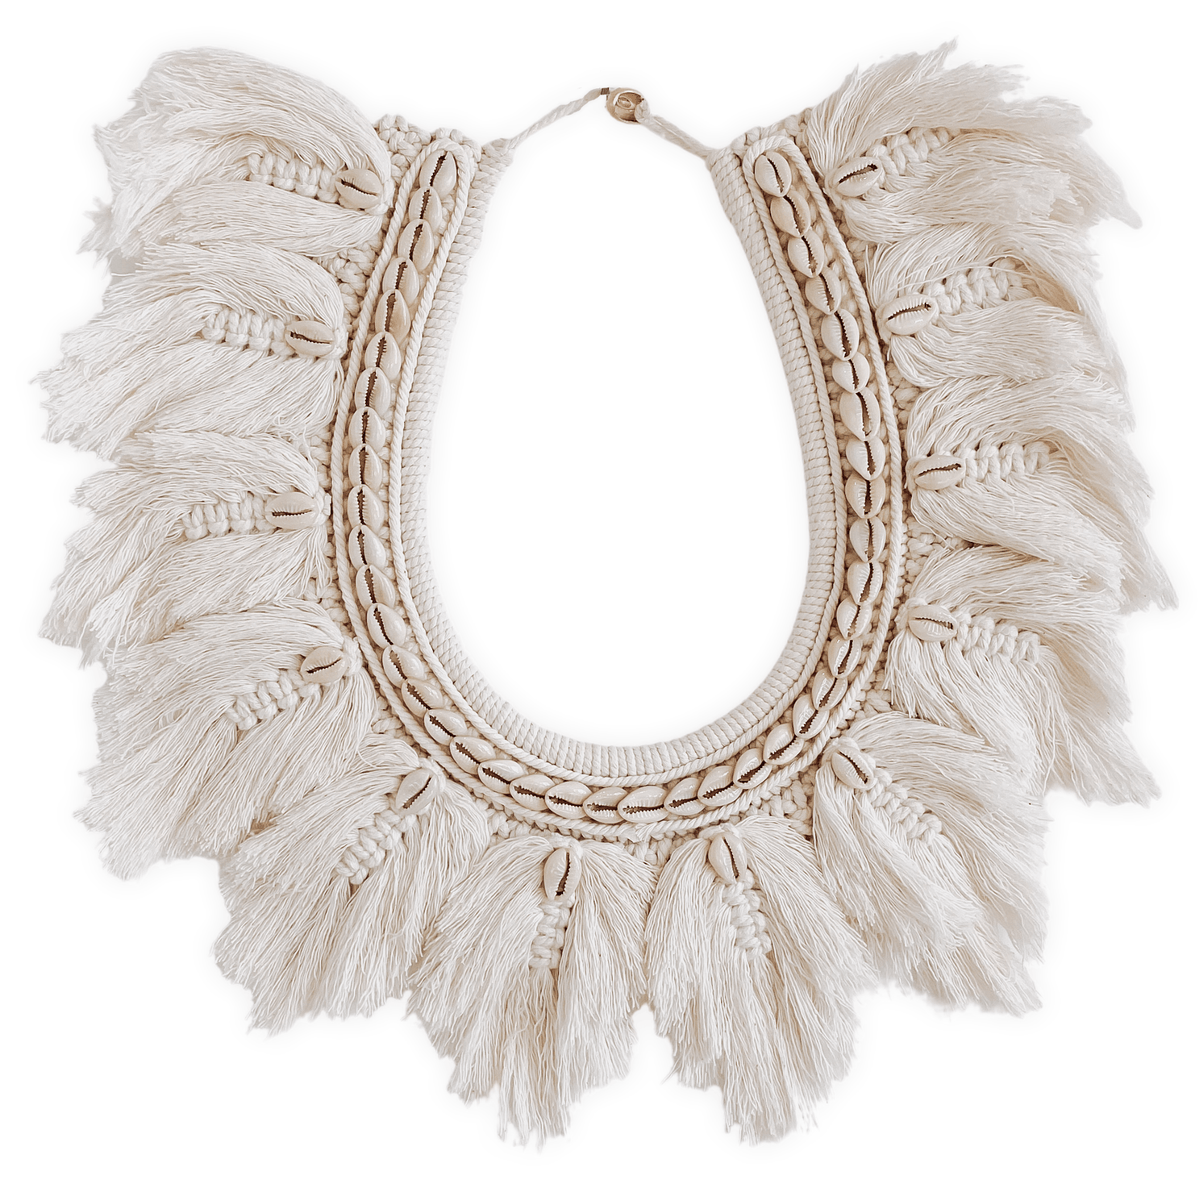 Inspired by a traditional tribal necklace but with the soft bohemian touch of macrame, the Myah hanging is a stunning piece full of neutral feminine texture. Consisting of twelve hand woven feathered macrame leaves in their natural relaxed state & cowrie shell detail